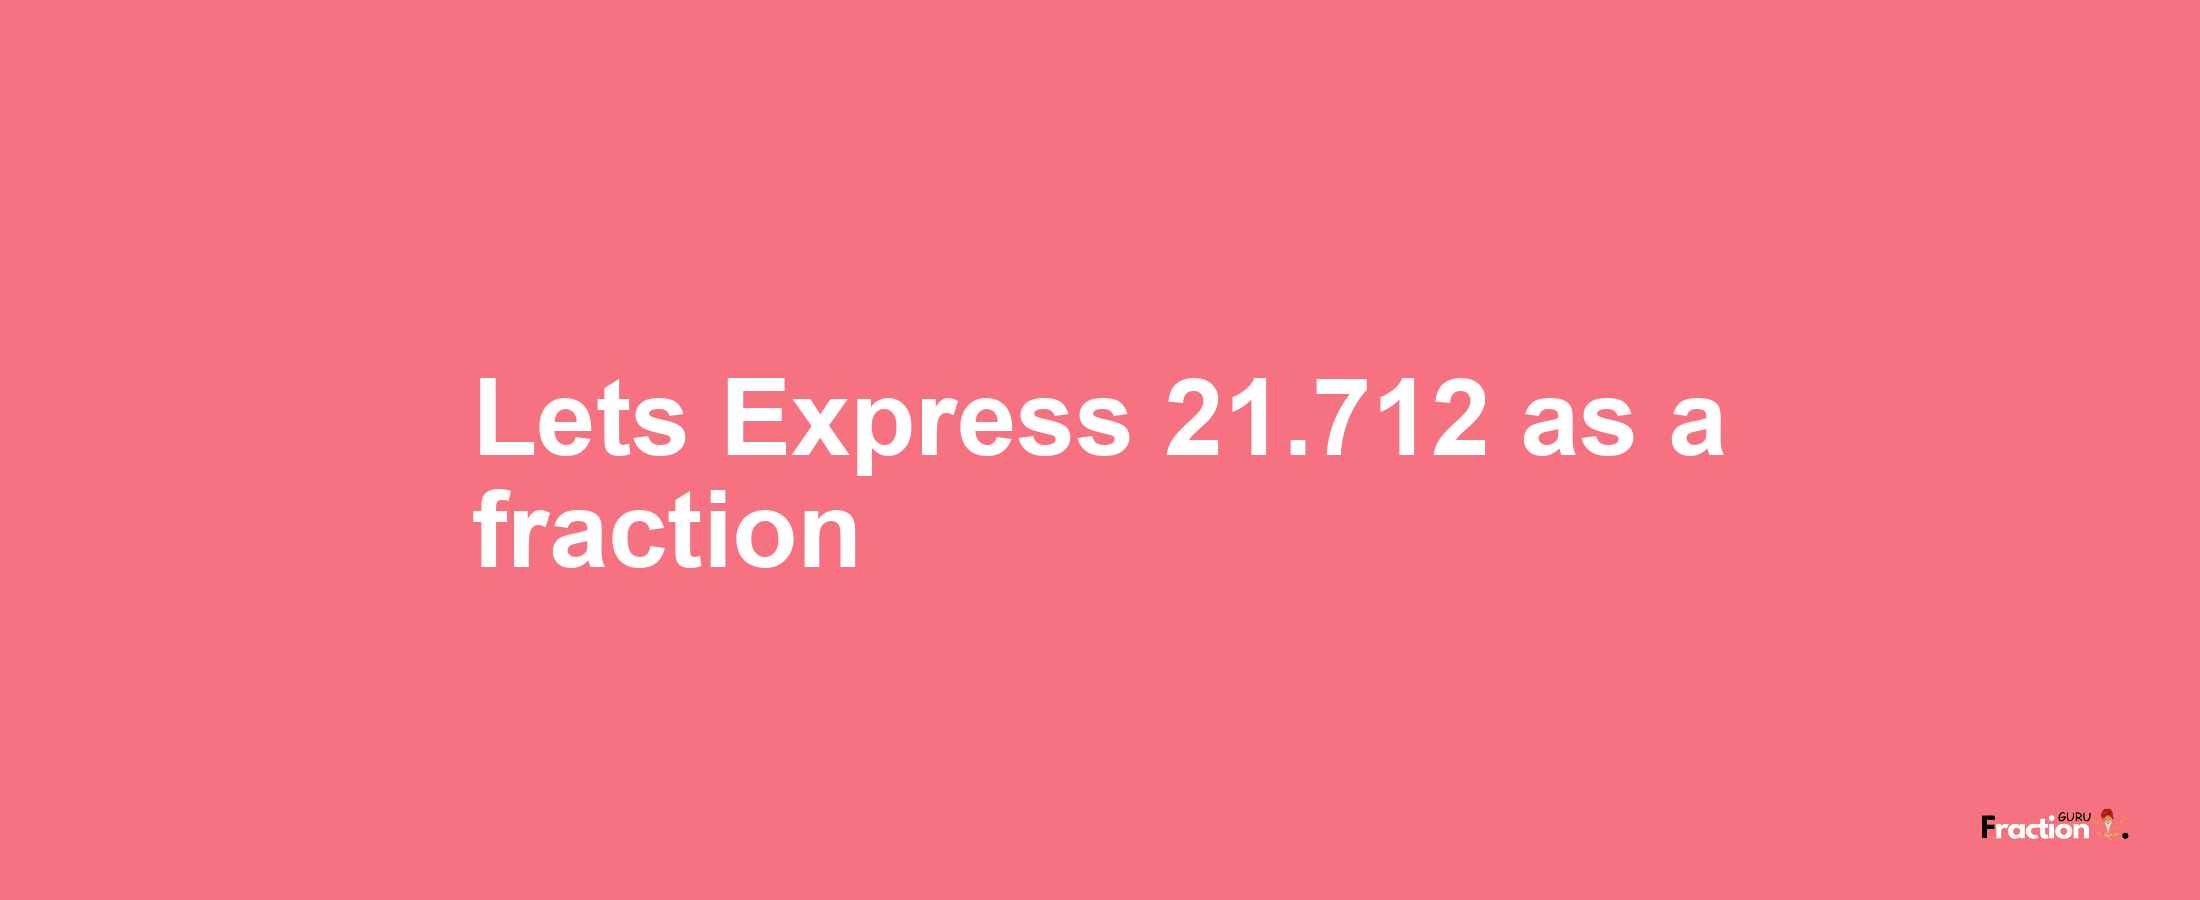 Lets Express 21.712 as afraction